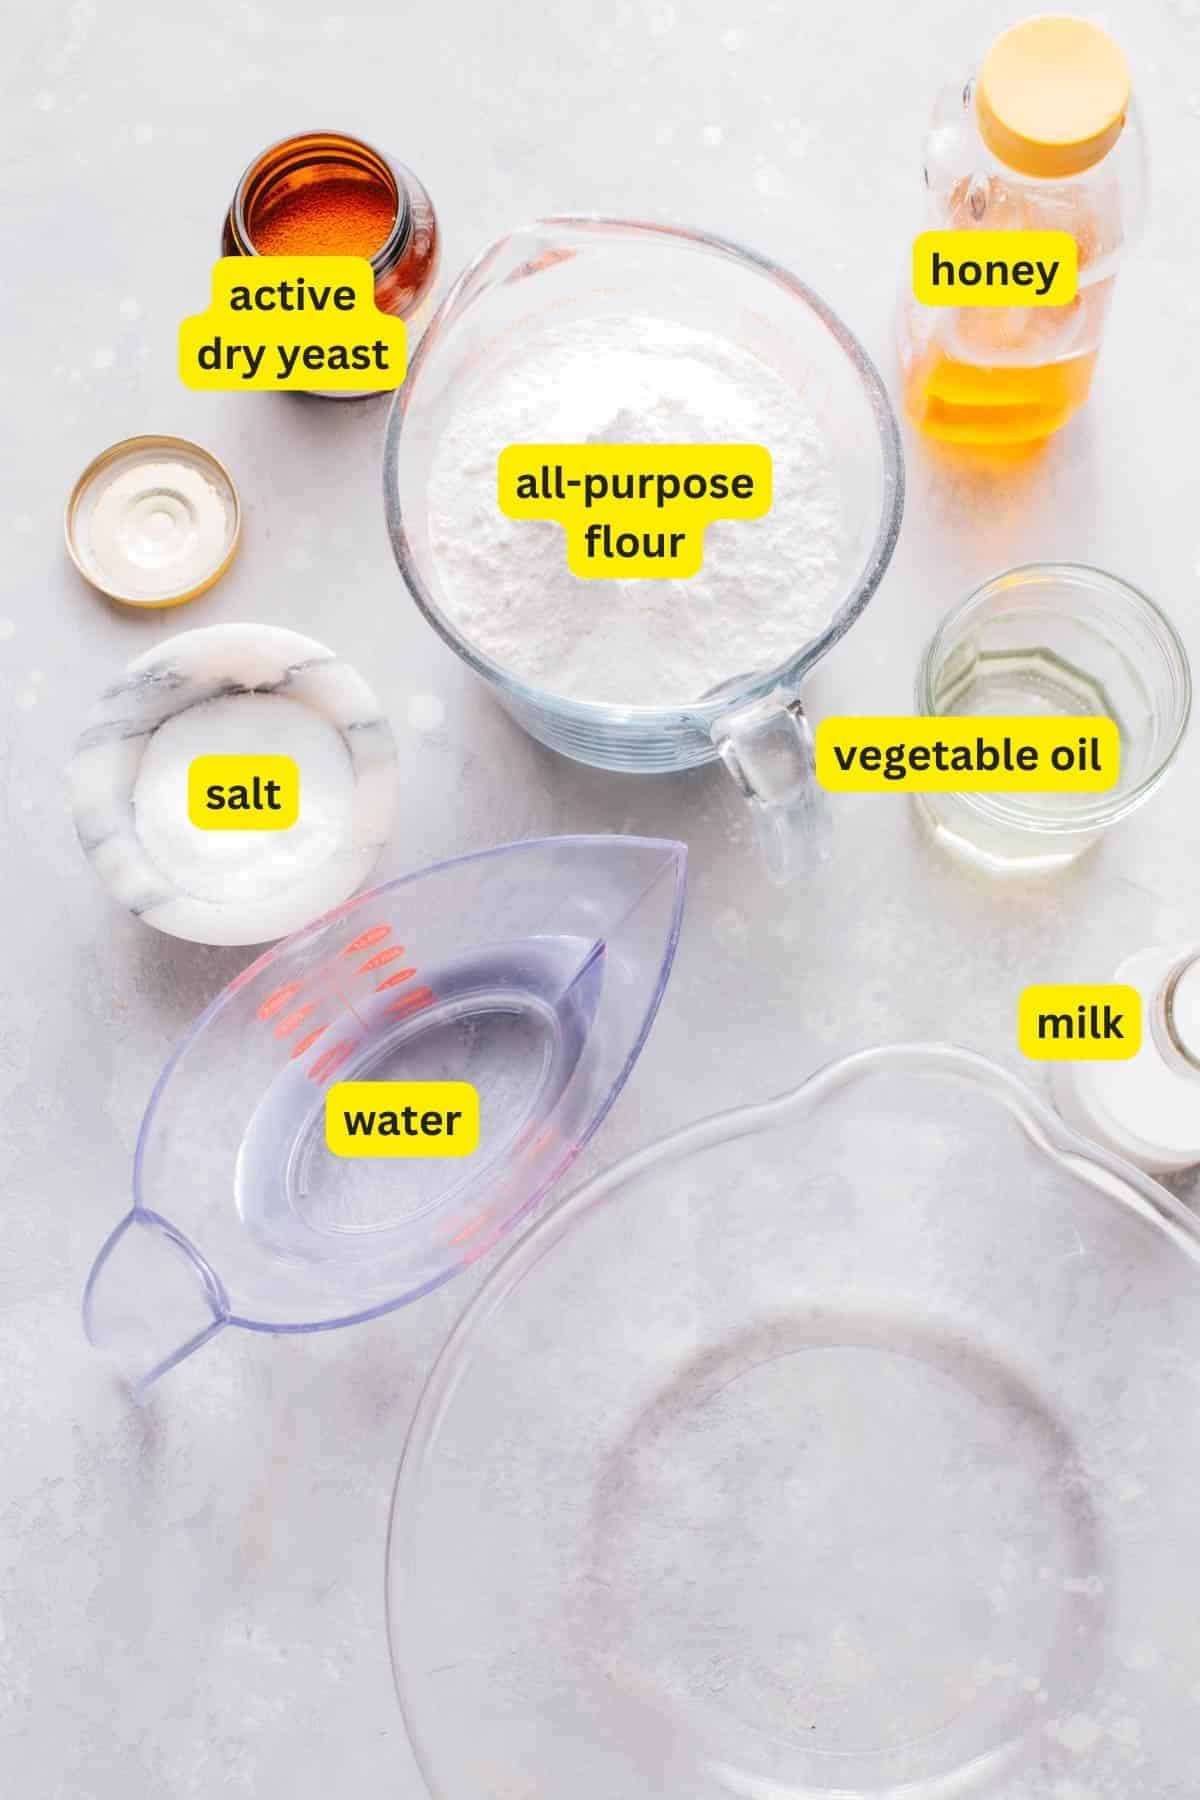 Ingredients for Turkish bread (bazlama) arranged on a kitchen countertop, including active dry yeast, all-purpose flour, honey, salt, water, vegetable oil, and milk.